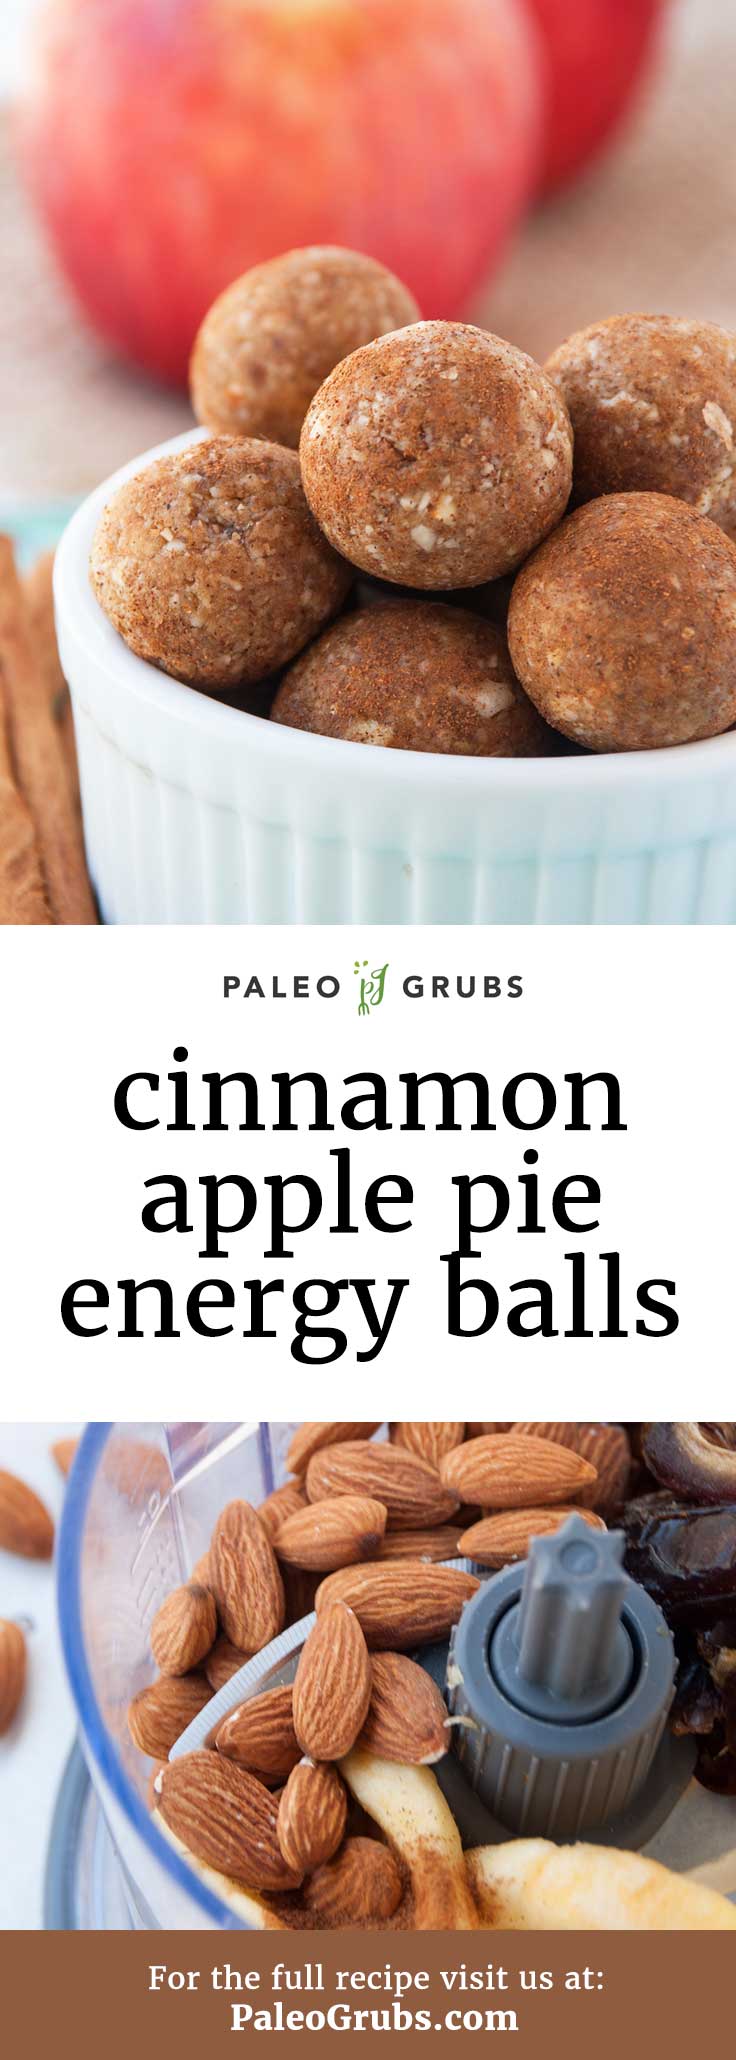 These Paleo energy balls are kind of like the most energy packed bite of the most pure apple pie essence you have ever tasted in your life! Pure apple pie bliss.